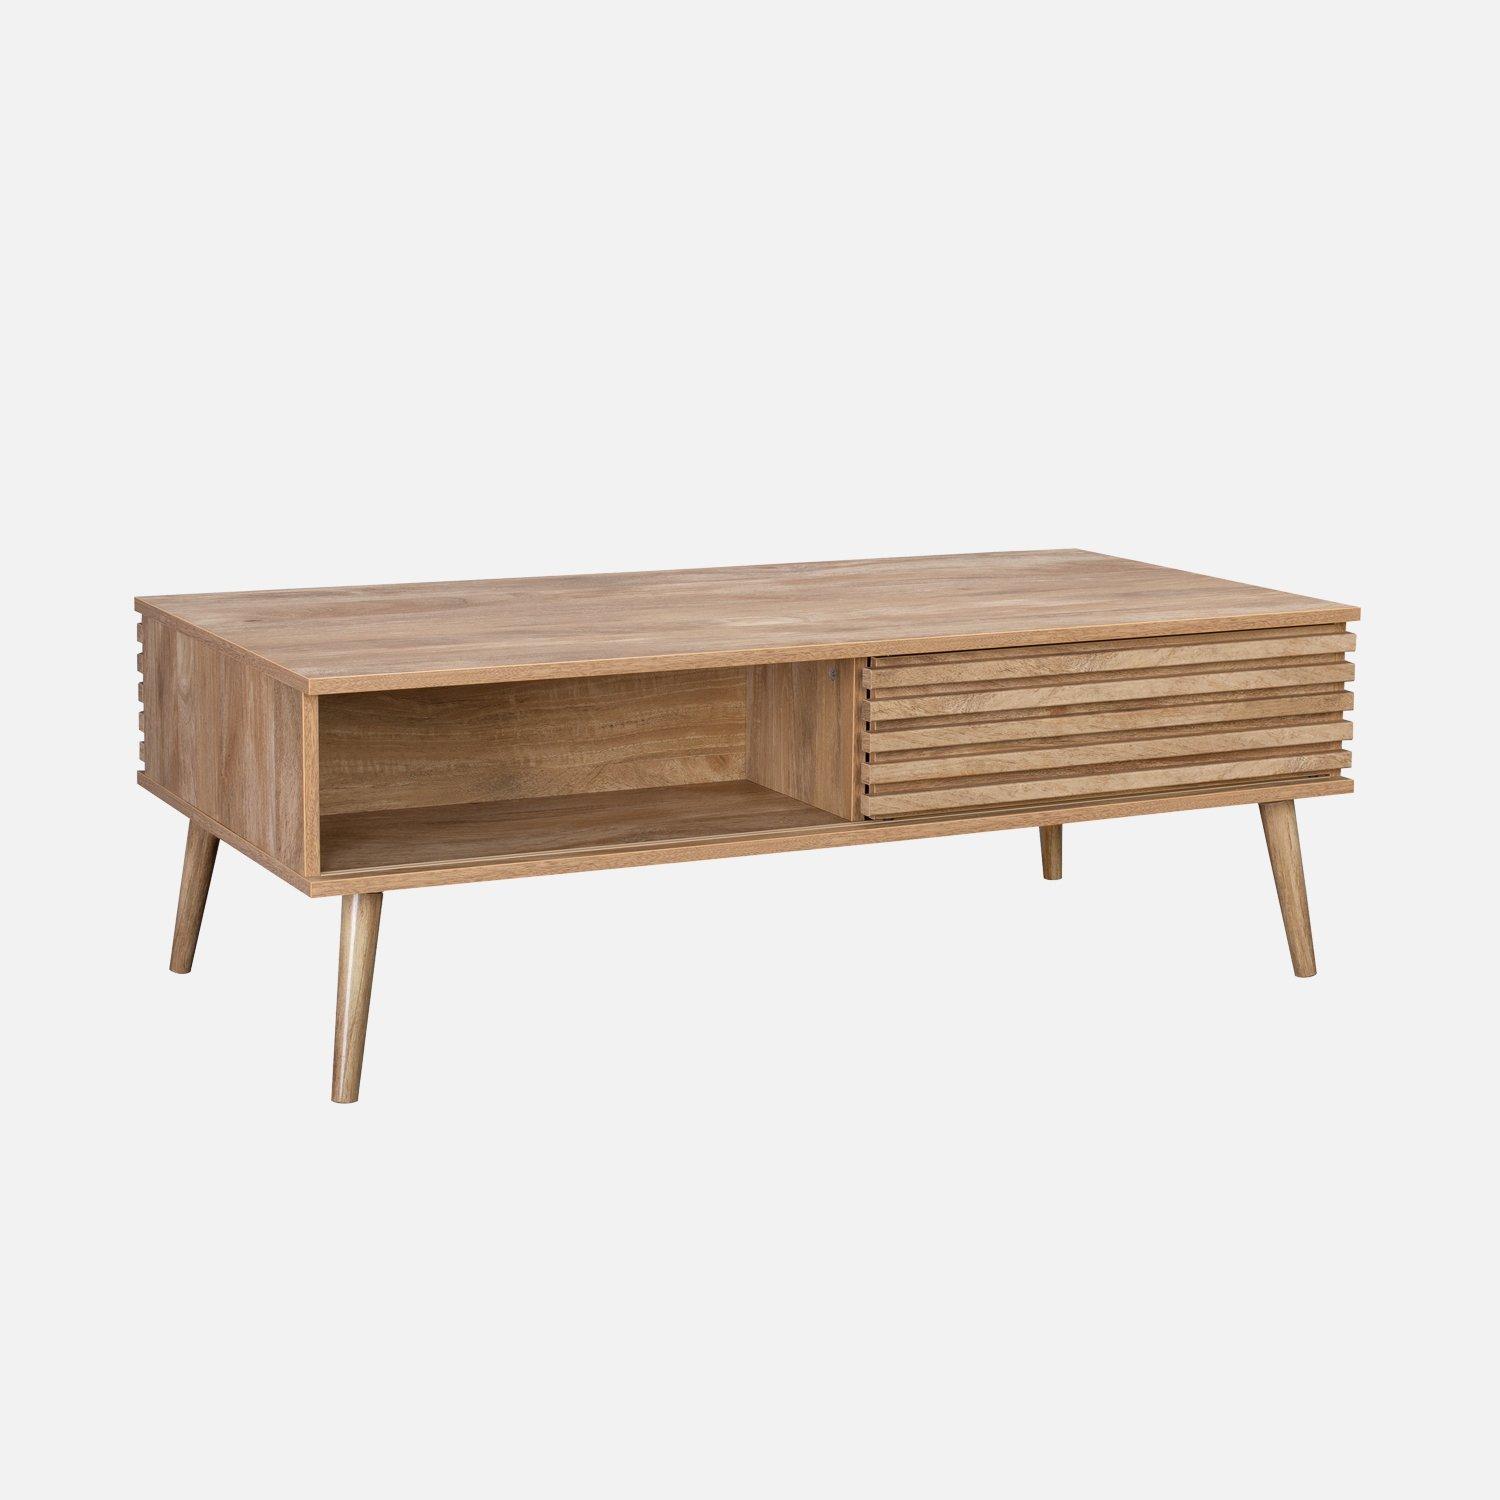 Scandinavian Coffee Table With Sliding Doors Grooved Wood Decor